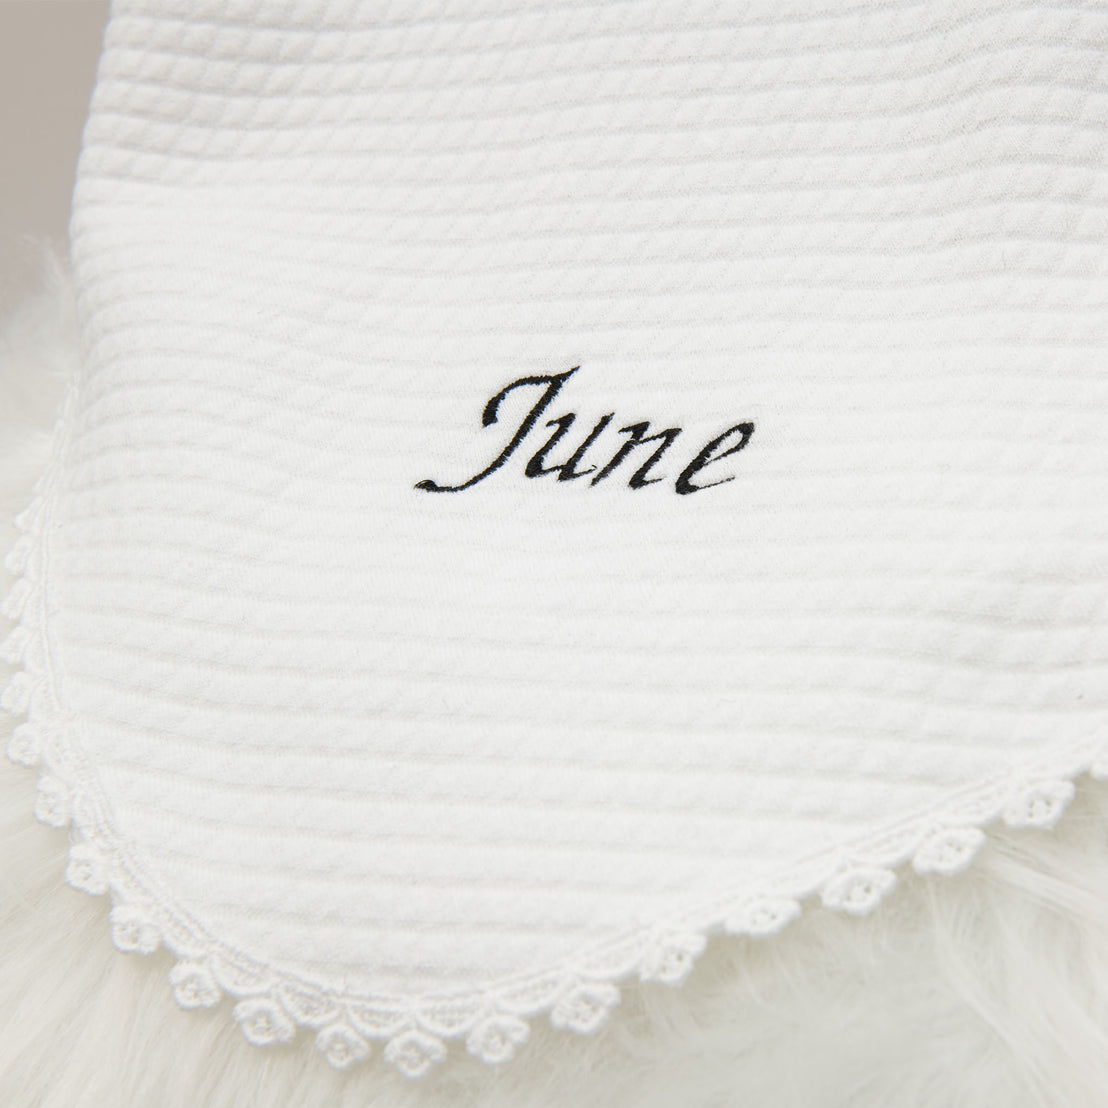 Close-up of a June Personalized Blanket with a scalloped lace edge, featuring the word "june" embroidered in black cursive script after a christening.